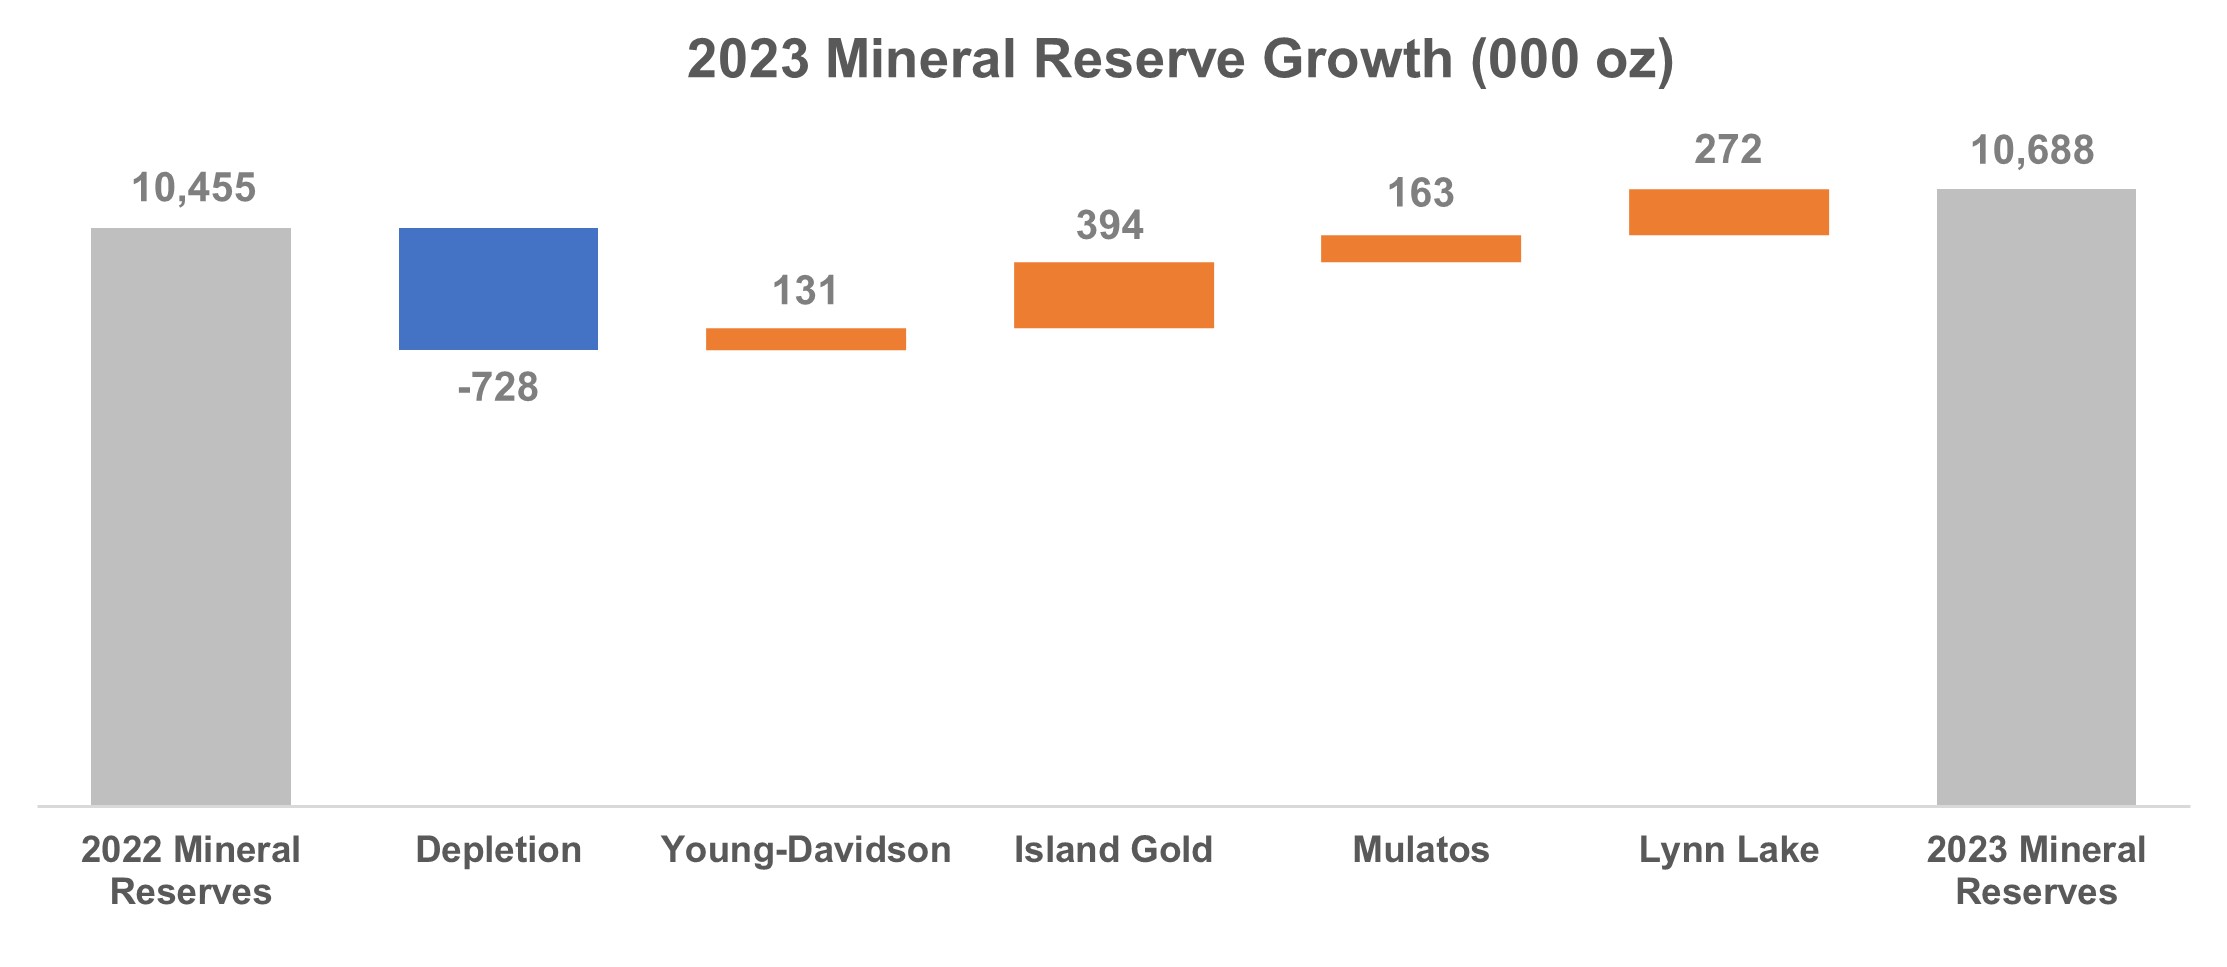 2023 Mineral Reserve Growth (000 oz)